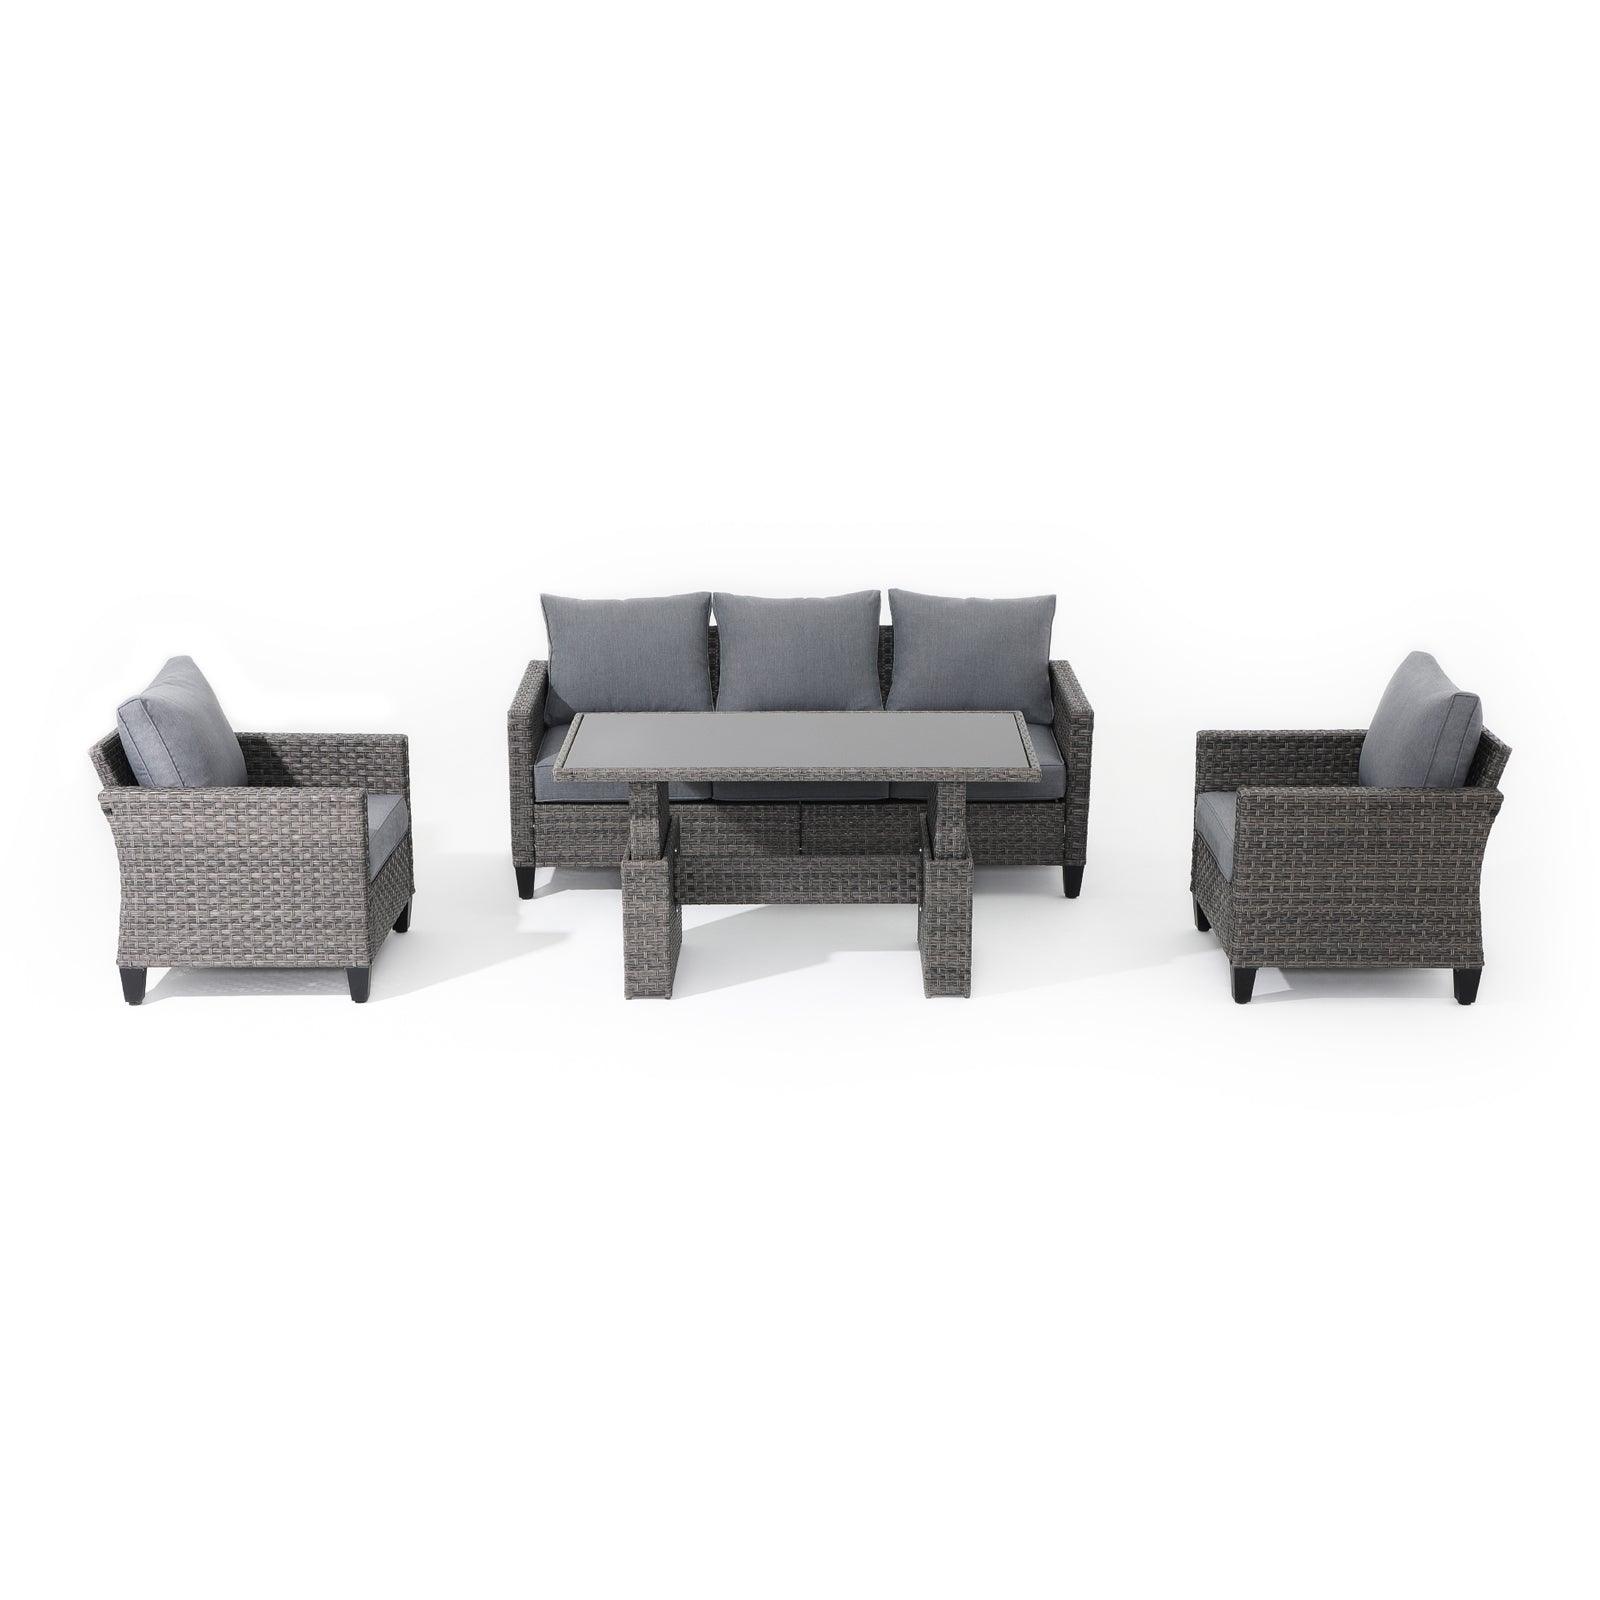 Ayia 4-Piece Grey outdoor Sofa Set with Rattan design, grey cushions, a 3-seater sofa, 2 arm chairs ,1 lift-top dining table  - Jardina Furniture #color_Grey#piece_4-pc. with Table